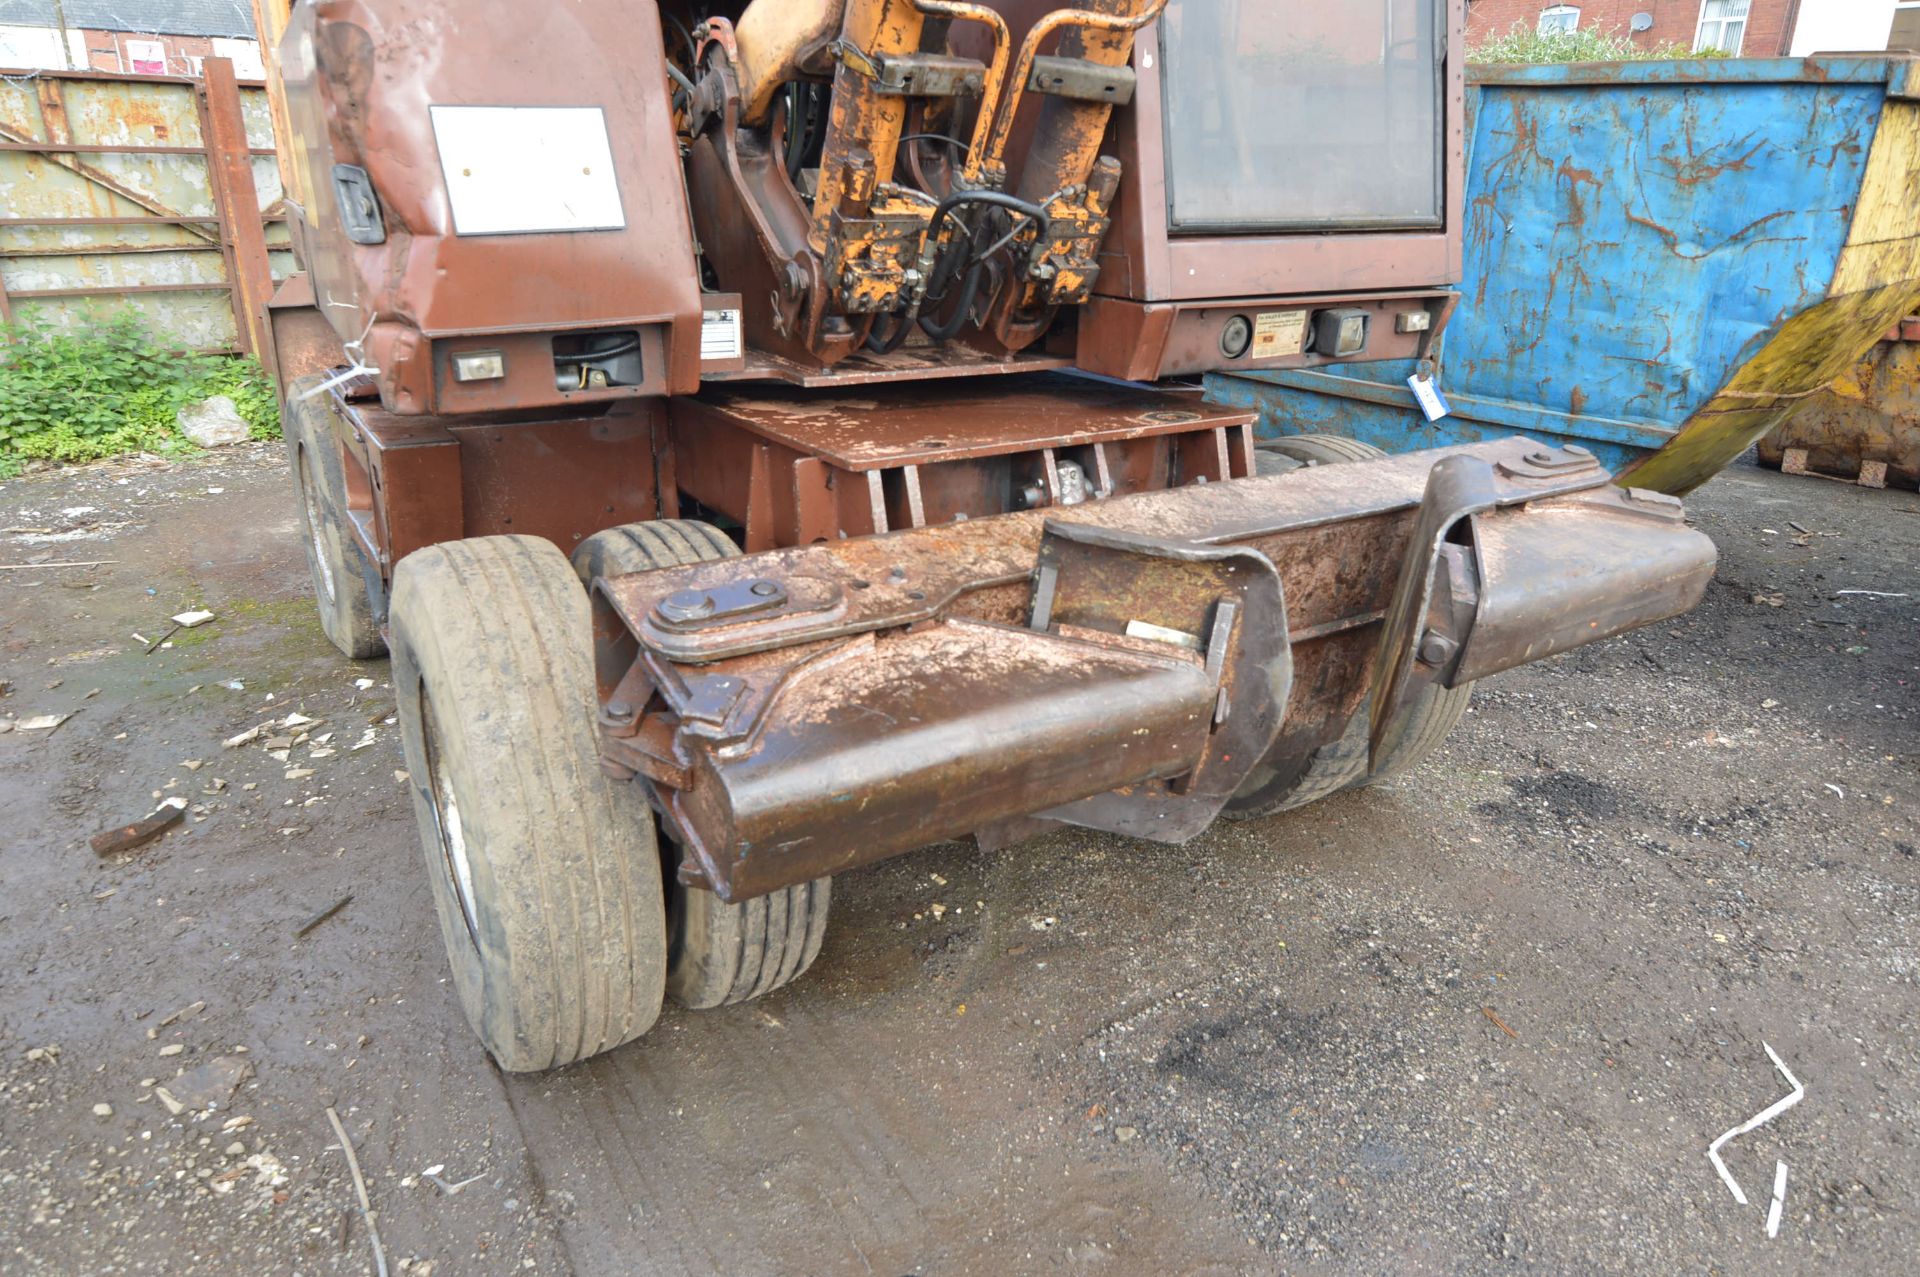 Case 888P MATERIALS HANDLER, serial no. CGG0006322, 17,000kg, 15,539 hours (at time of listing), - Image 6 of 10